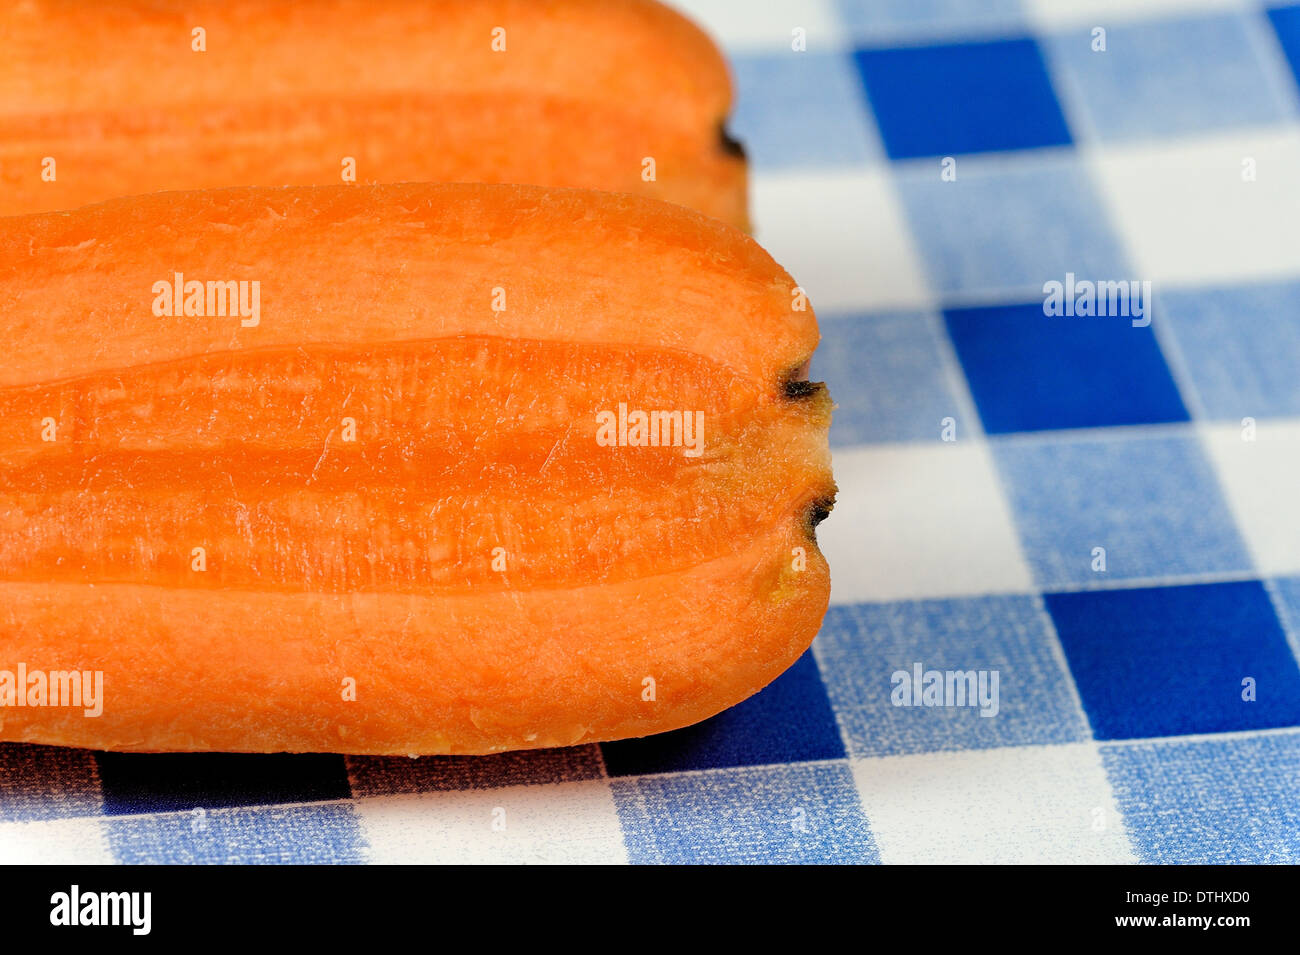 A fresh carrot cut into 2 pieces on a blue gingham background Stock Photo